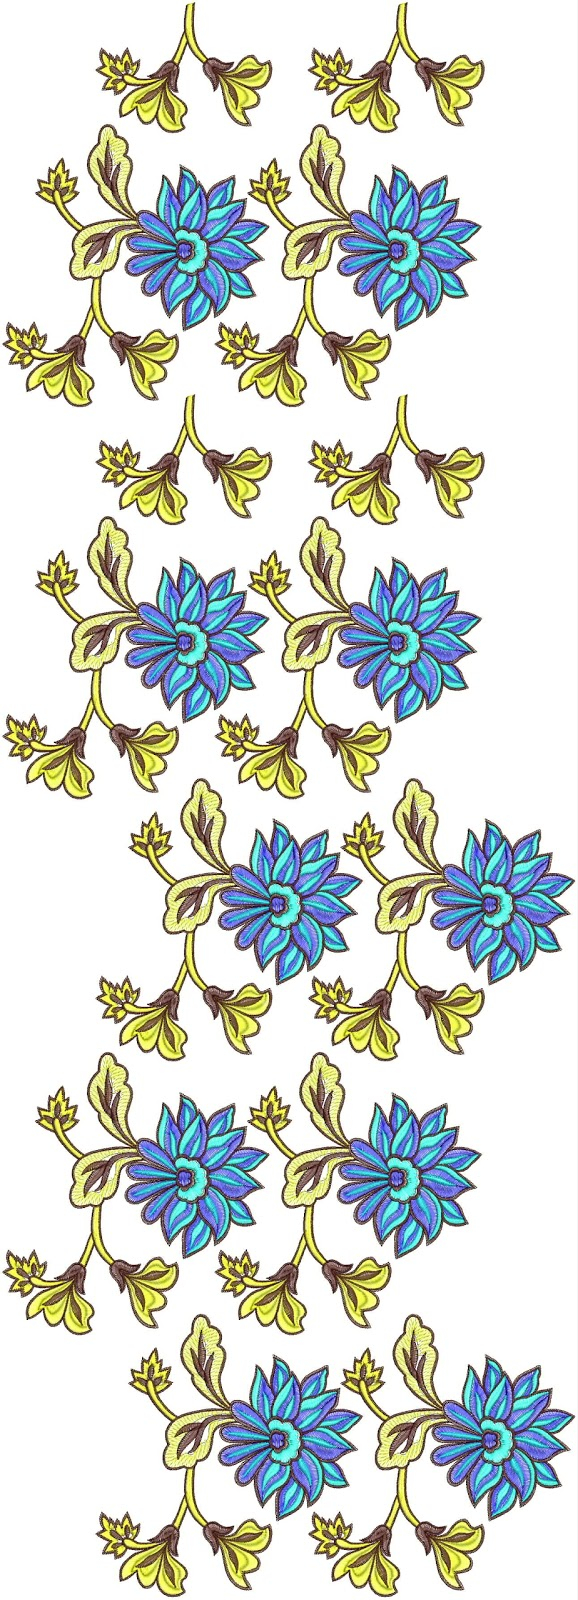 Indian Embroidery Designs Patterns Embdesigntube Sky Blue Attractive Color Embroidered Patterns